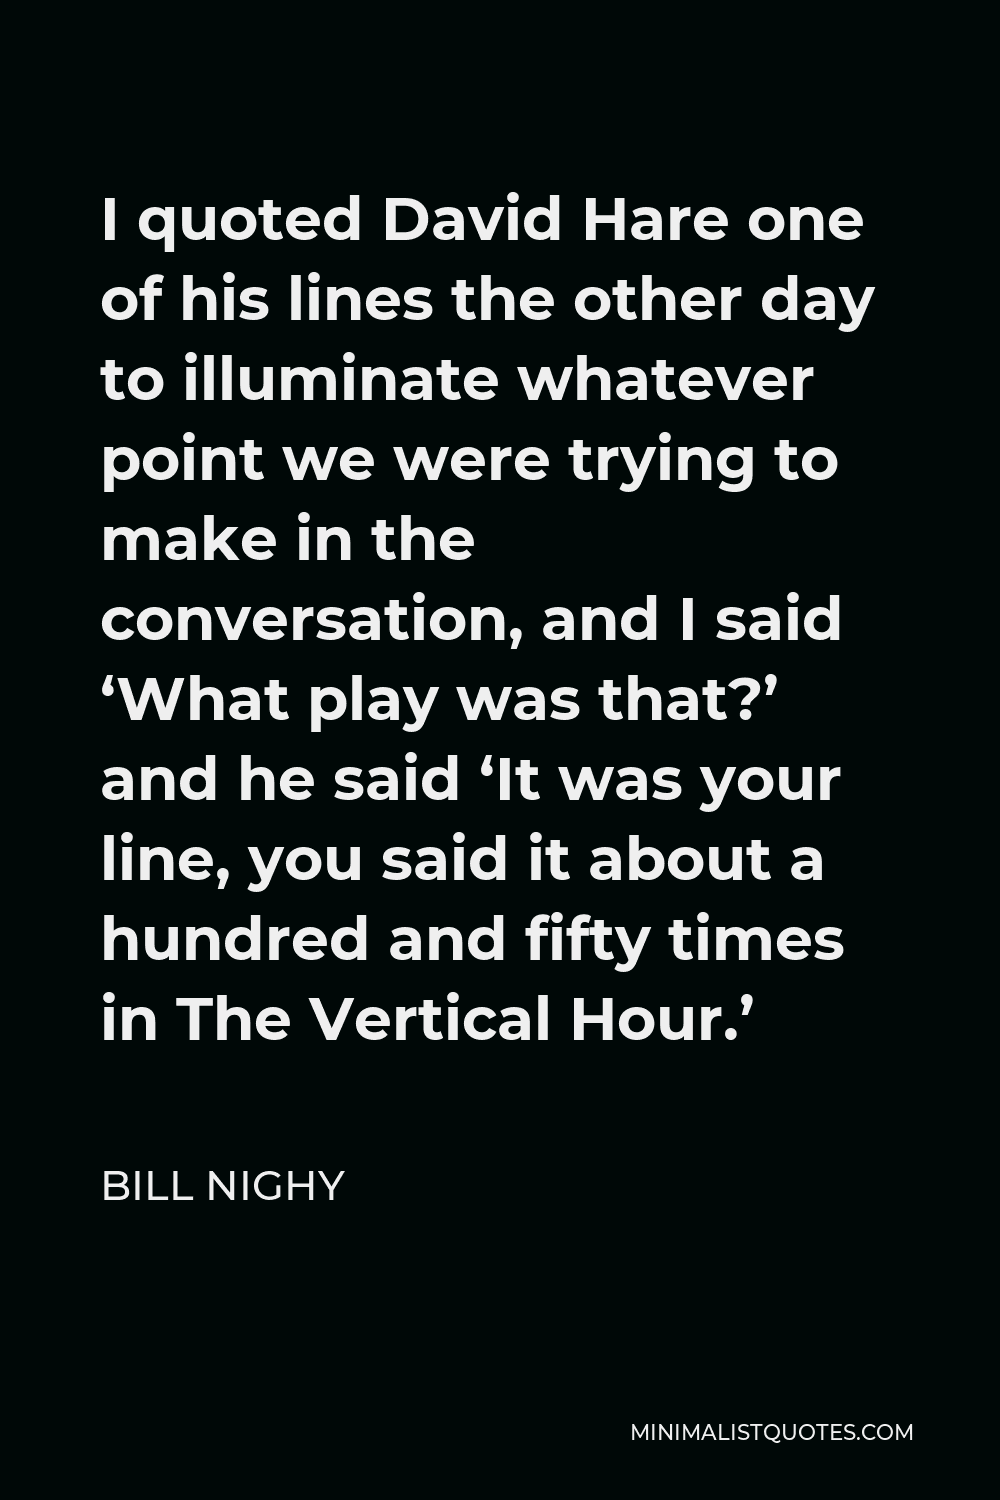 Bill Nighy Quote - I quoted David Hare one of his lines the other day to illuminate whatever point we were trying to make in the conversation, and I said ‘What play was that?’ and he said ‘It was your line, you said it about a hundred and fifty times in The Vertical Hour.’